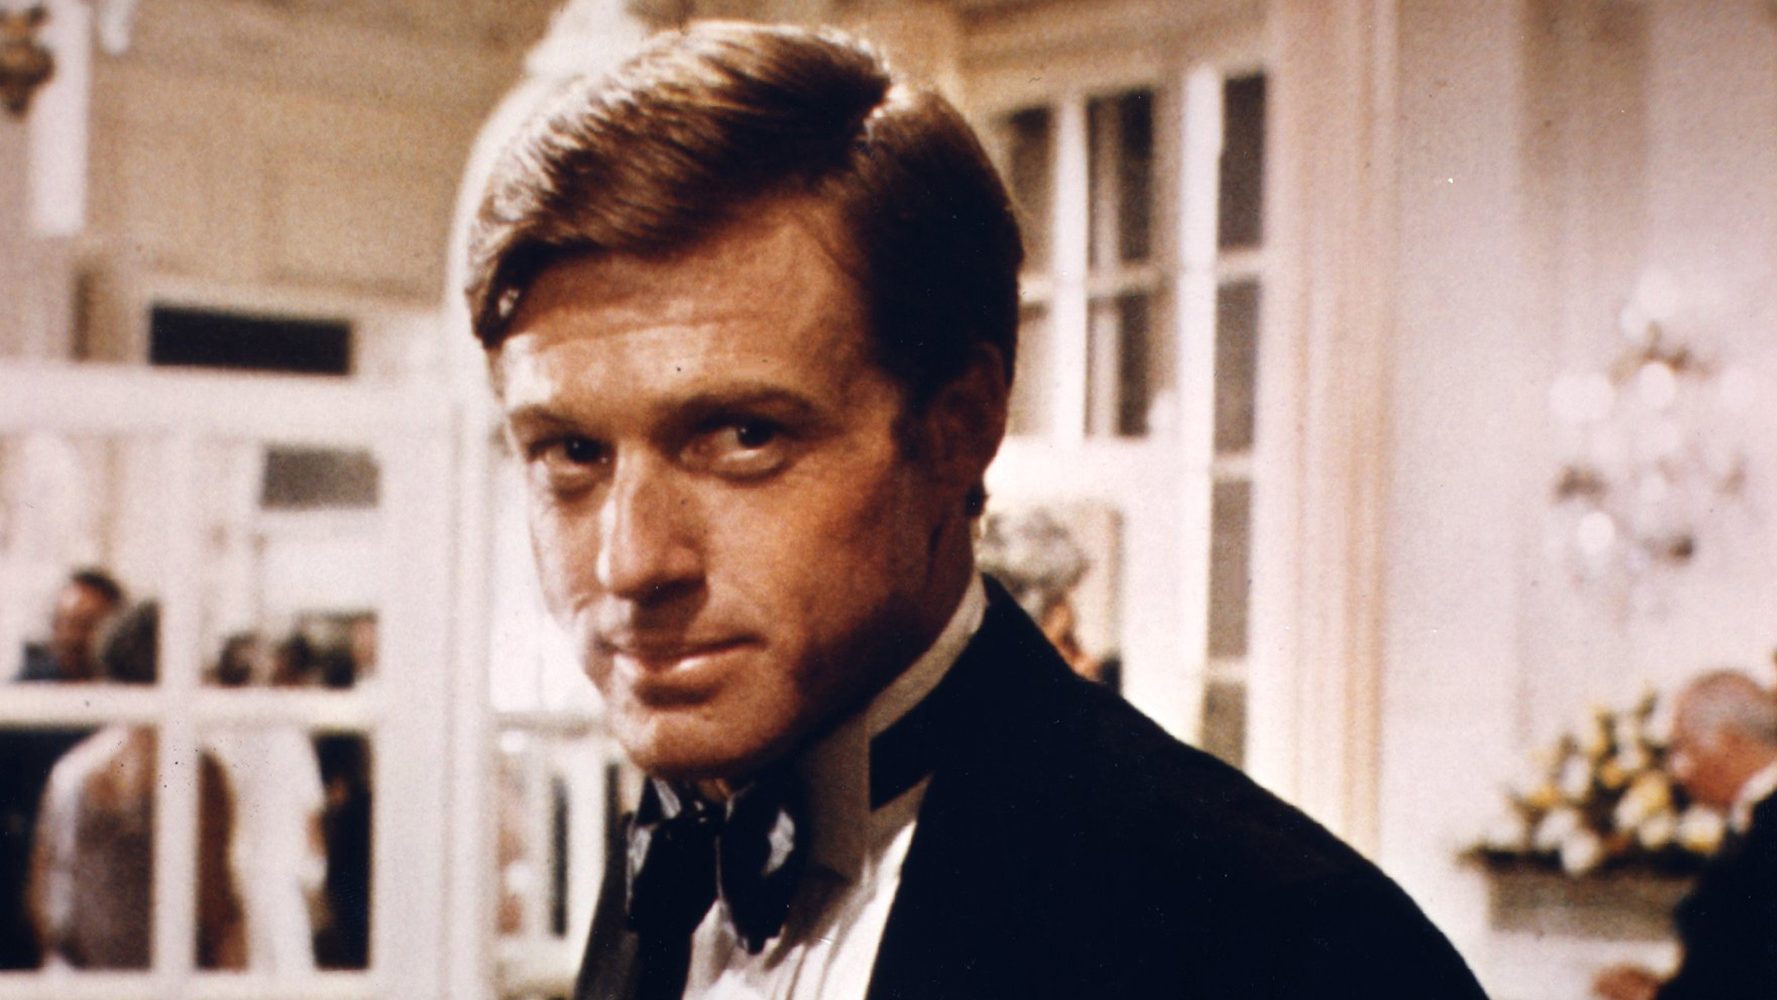 Robert Redford as Gatsby in The Great Gatsby